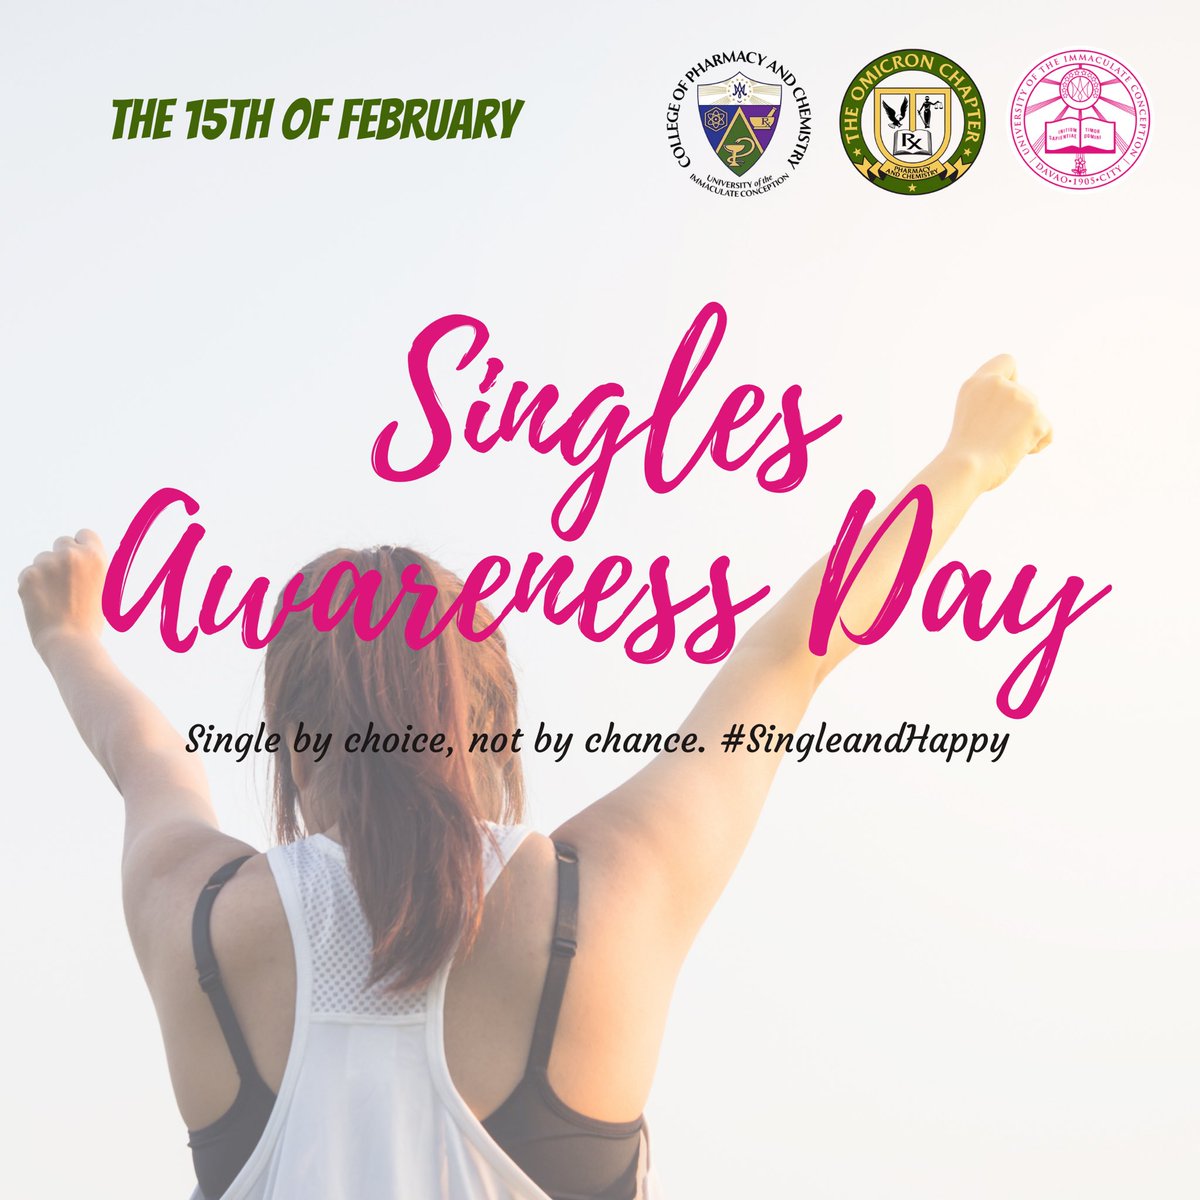 Yesterday, we celebrated love in all of its forms, “self-love” being one of them. Today, we extend the celebration of that certain type of love.

HAPPY SINGLES AWARENESS DAY!💚

Q: Single ka because???

#Omicron24/7
#CPCVipers🐍
#SinglesAwarenessDay💚
#SingleandHappy